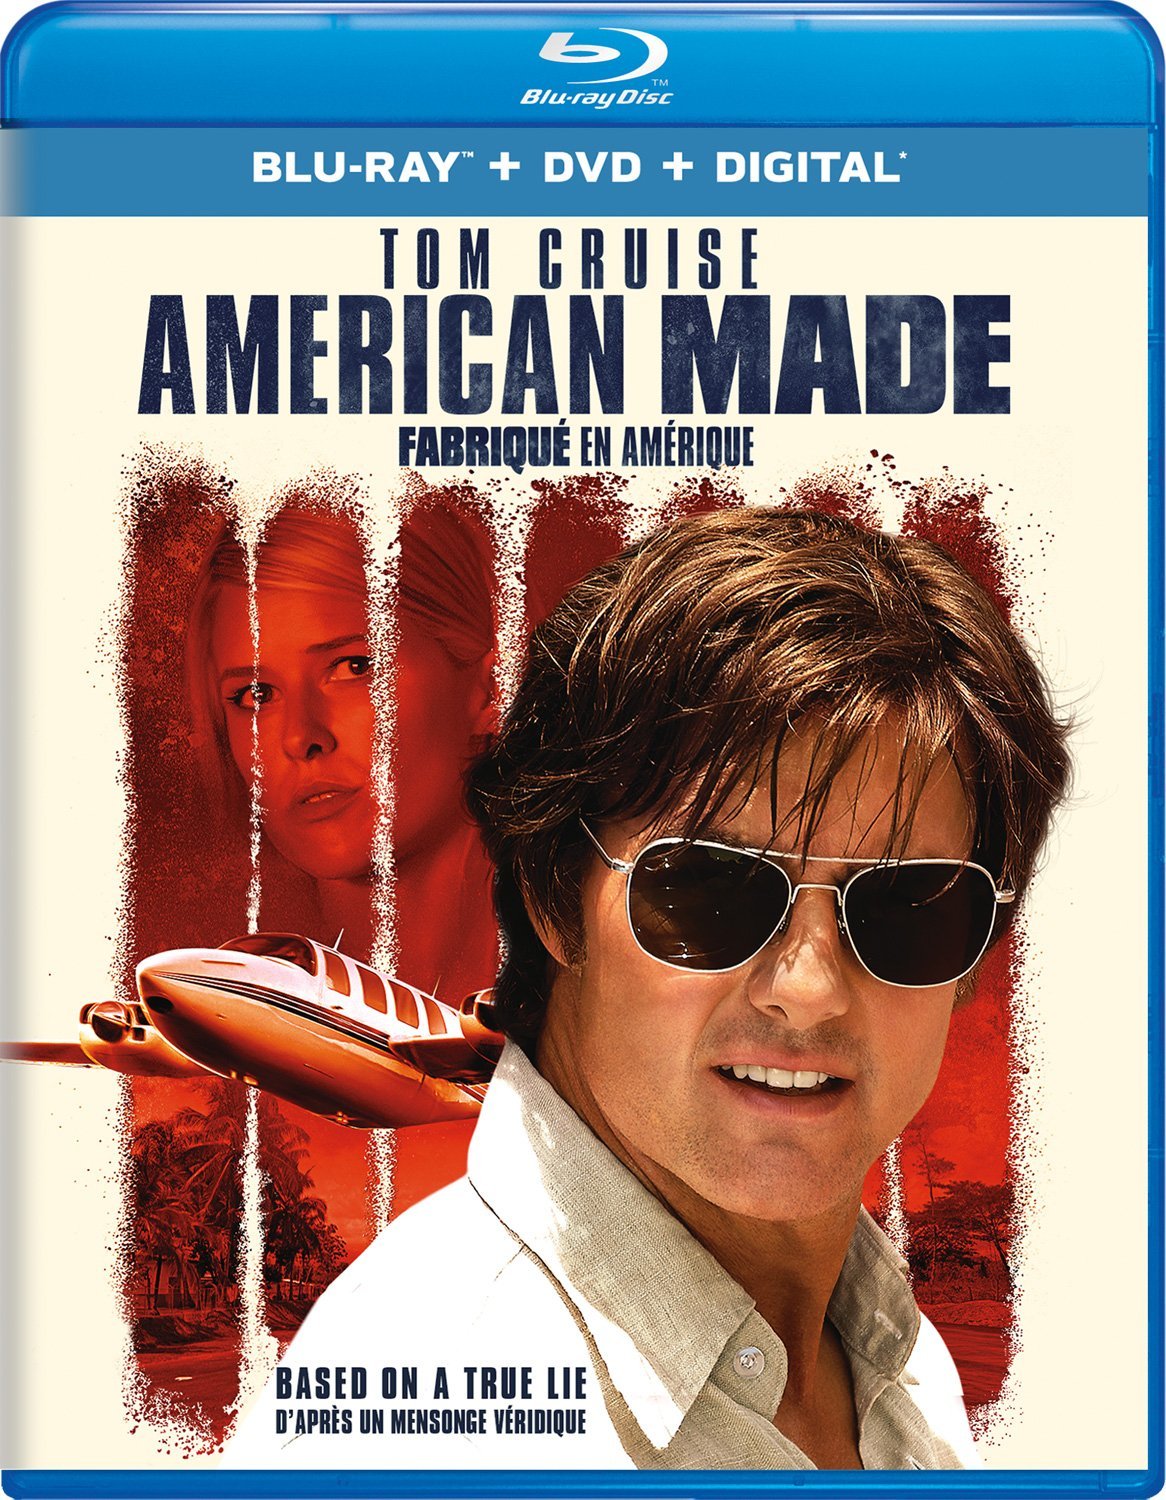 American Made is now available on Blu-ray, DVD and Digital HD